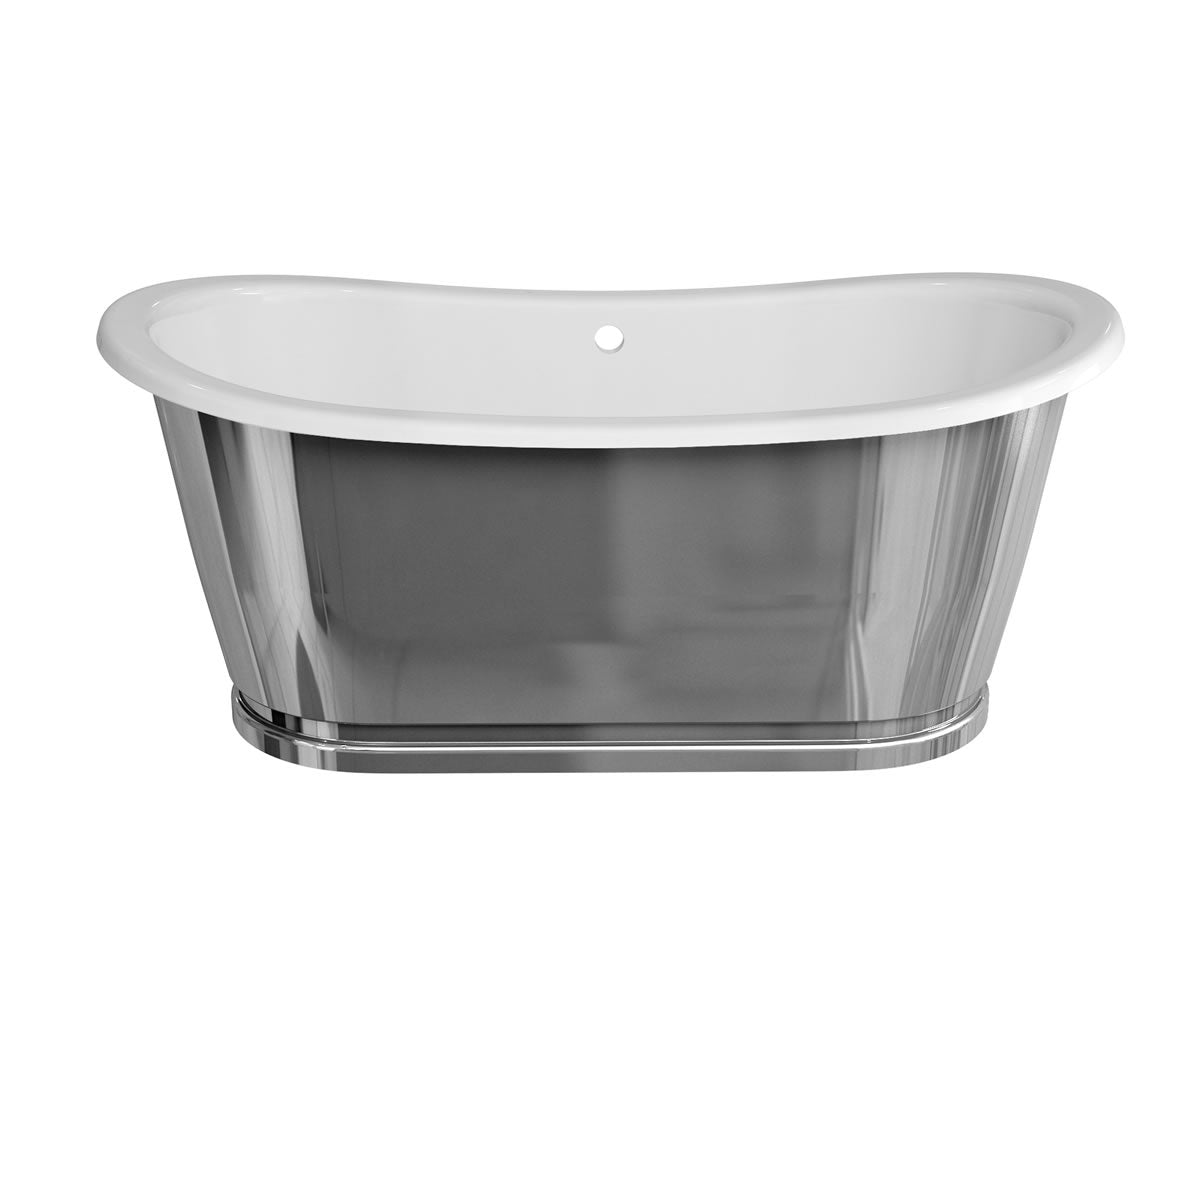 Clearwater Balthazar Chrome Classical Clearstone Freestanding Bath - 1675 x 761mm